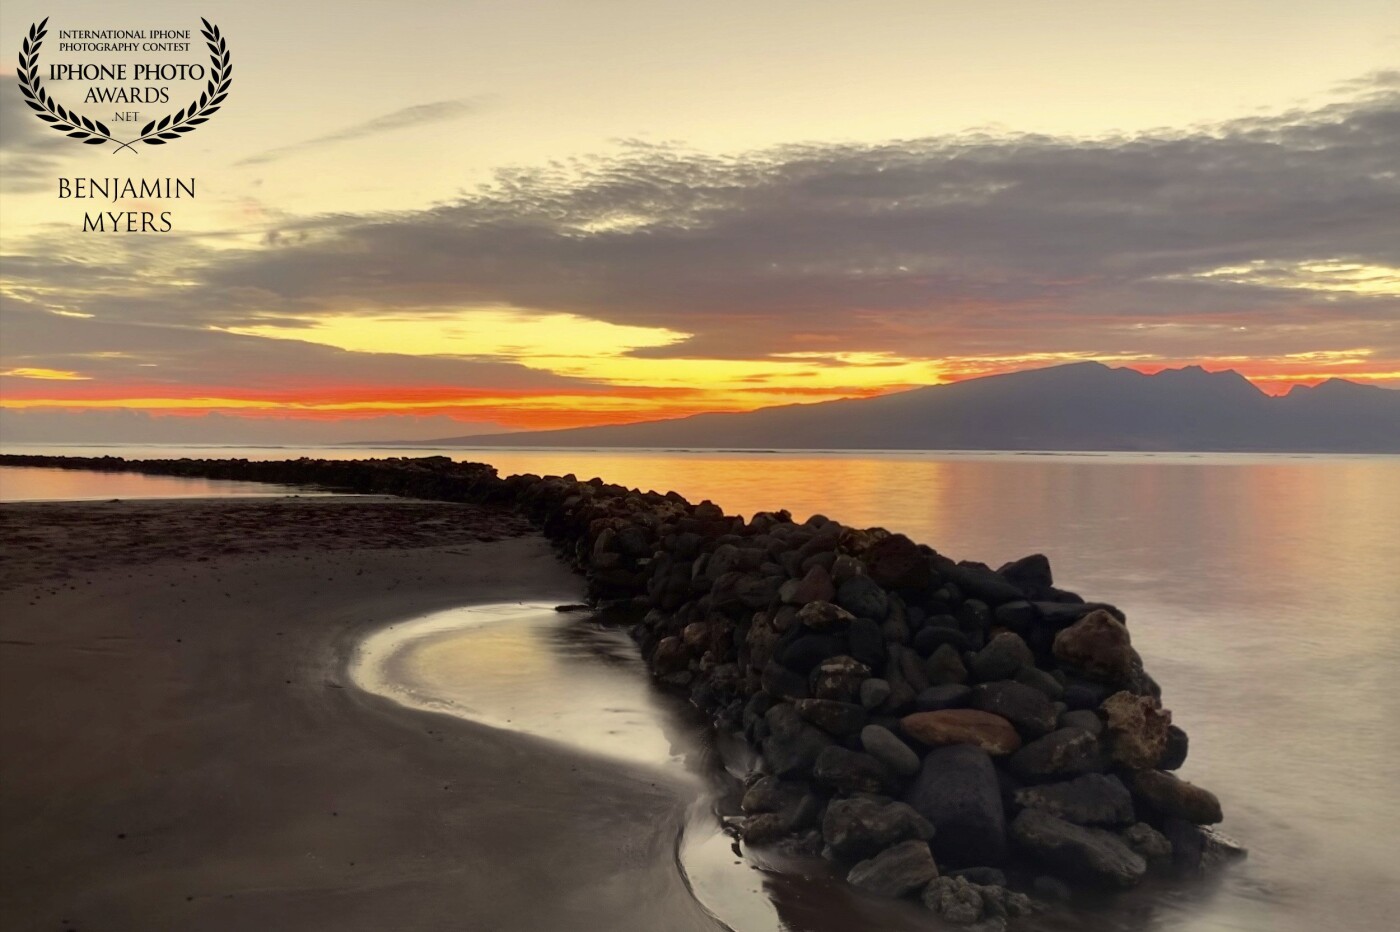 The experience this morning was spiritual for me. I was camping on Lana’i, and we were helping restore the rock wall for this ancient Hawaiian fish pond. The Sun came up over Maui with only the sound of the waves lapping on the shore. No traffic. No noise. Just peaceful reflection. 